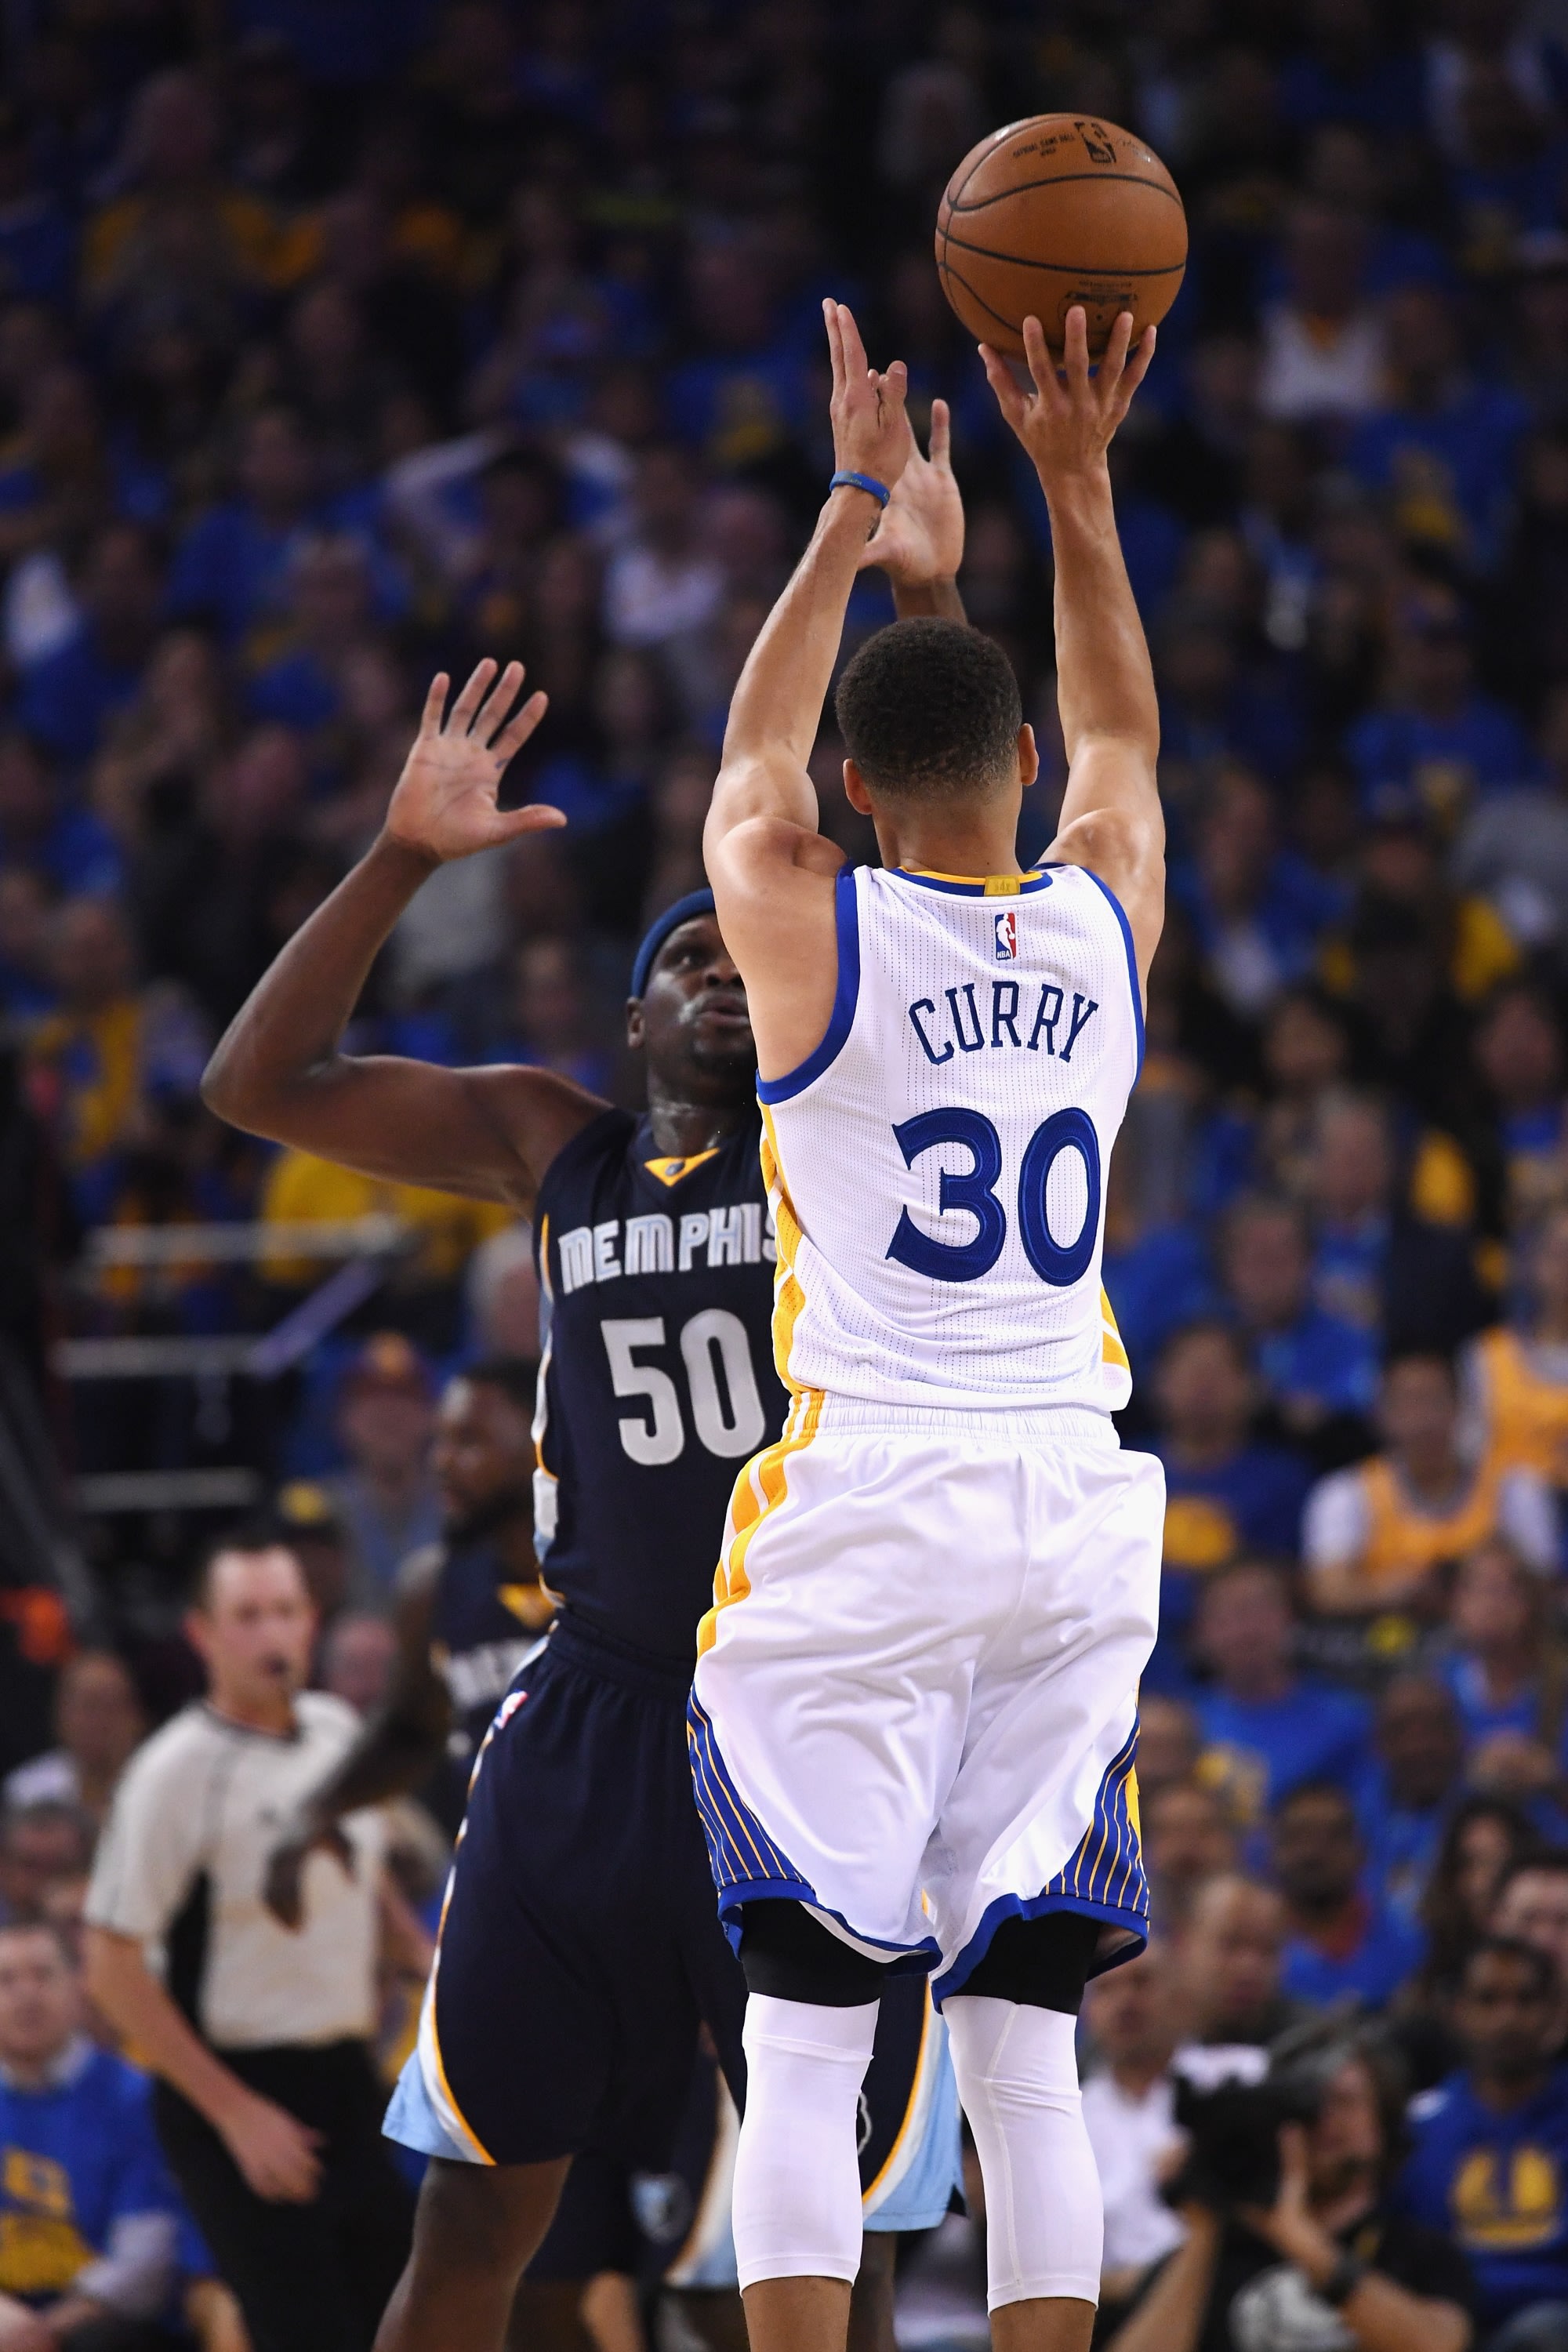 Stephen Curry put on a show in the Warrior's record-setting win. (Thearon W. Henderson/Getty Images)